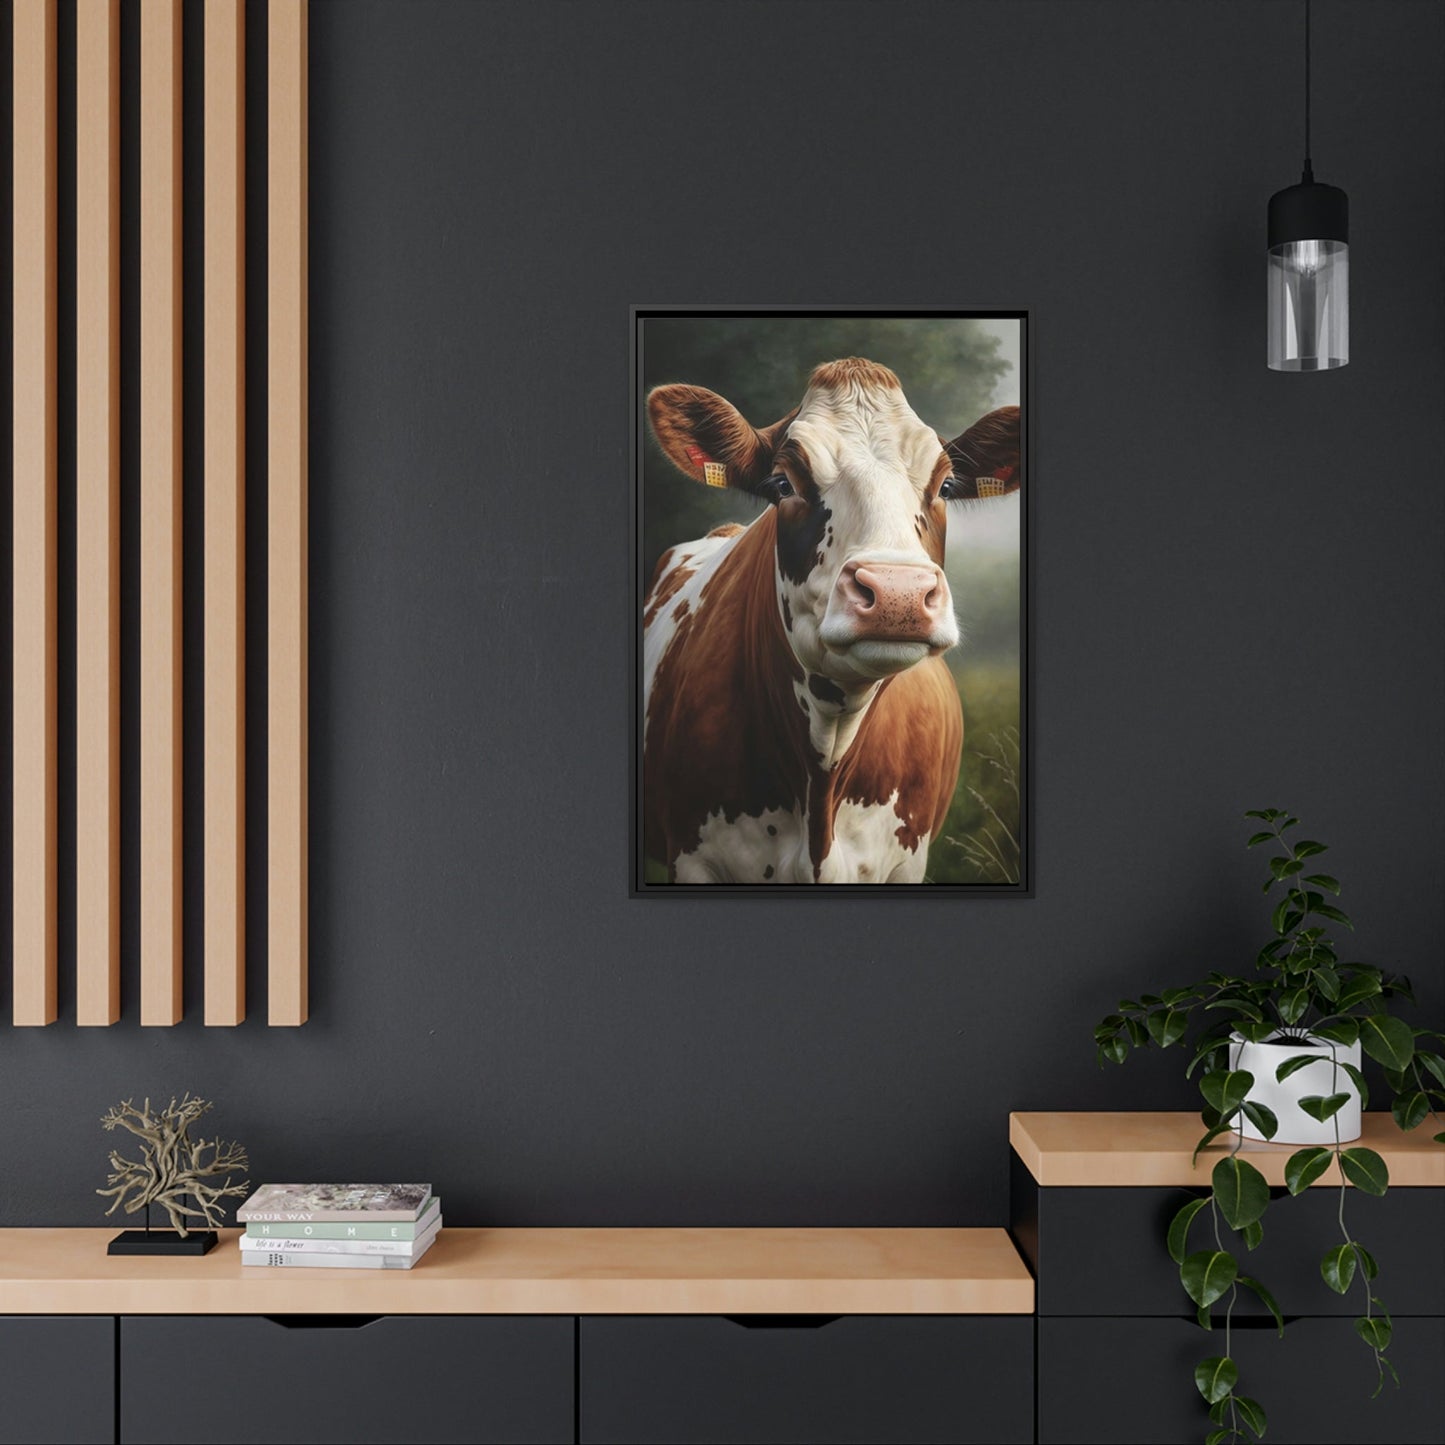 Bovine Beauty: A Painting of Cows in a Field